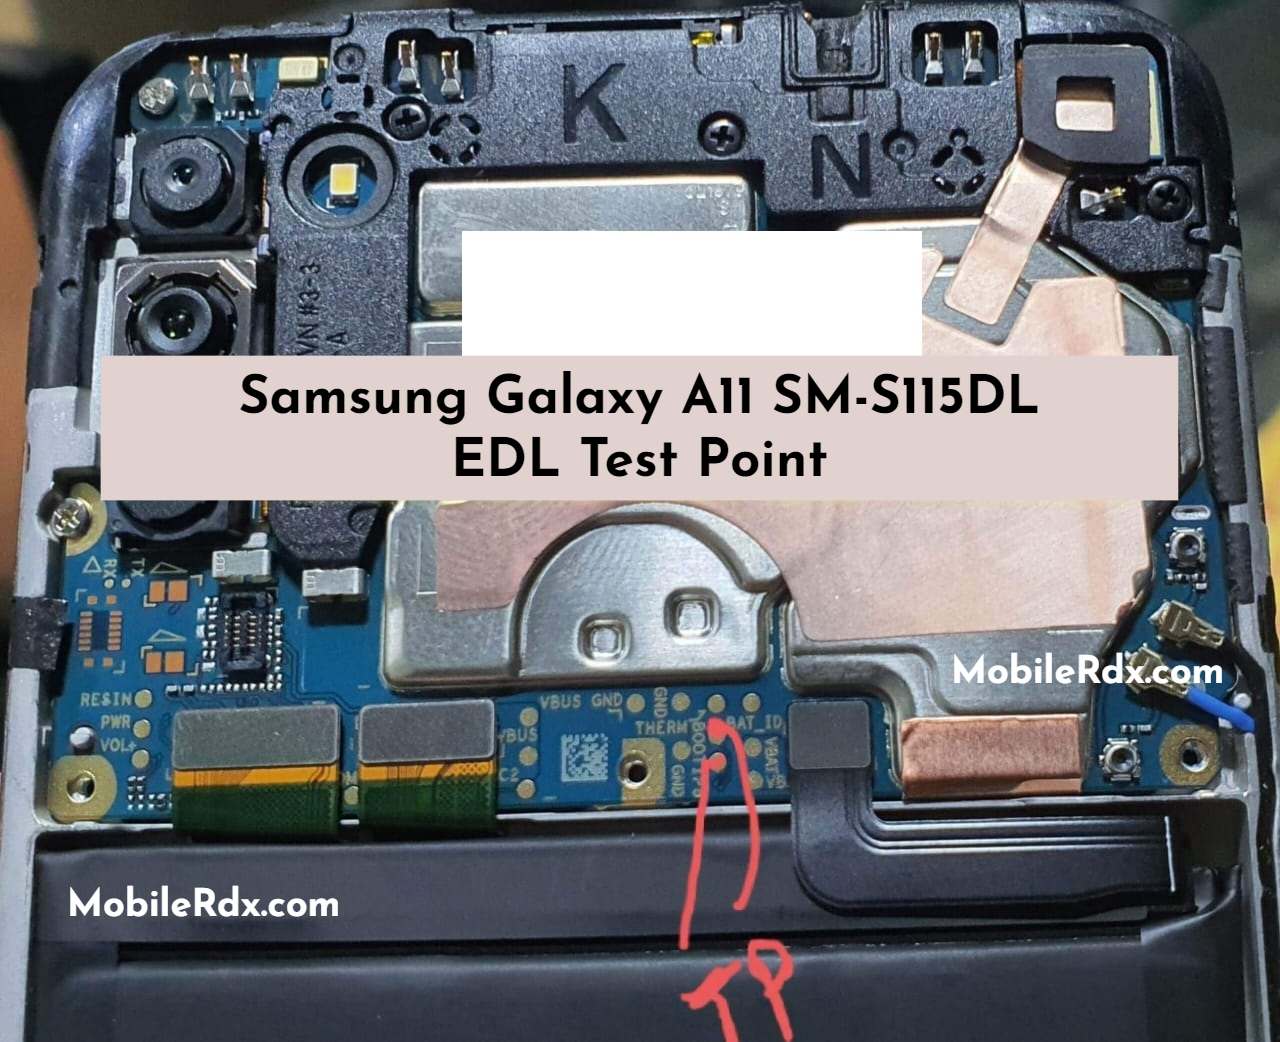 Samsung Galaxy A11 SM S115 Test Point   Reboot to EDL Mode 9008